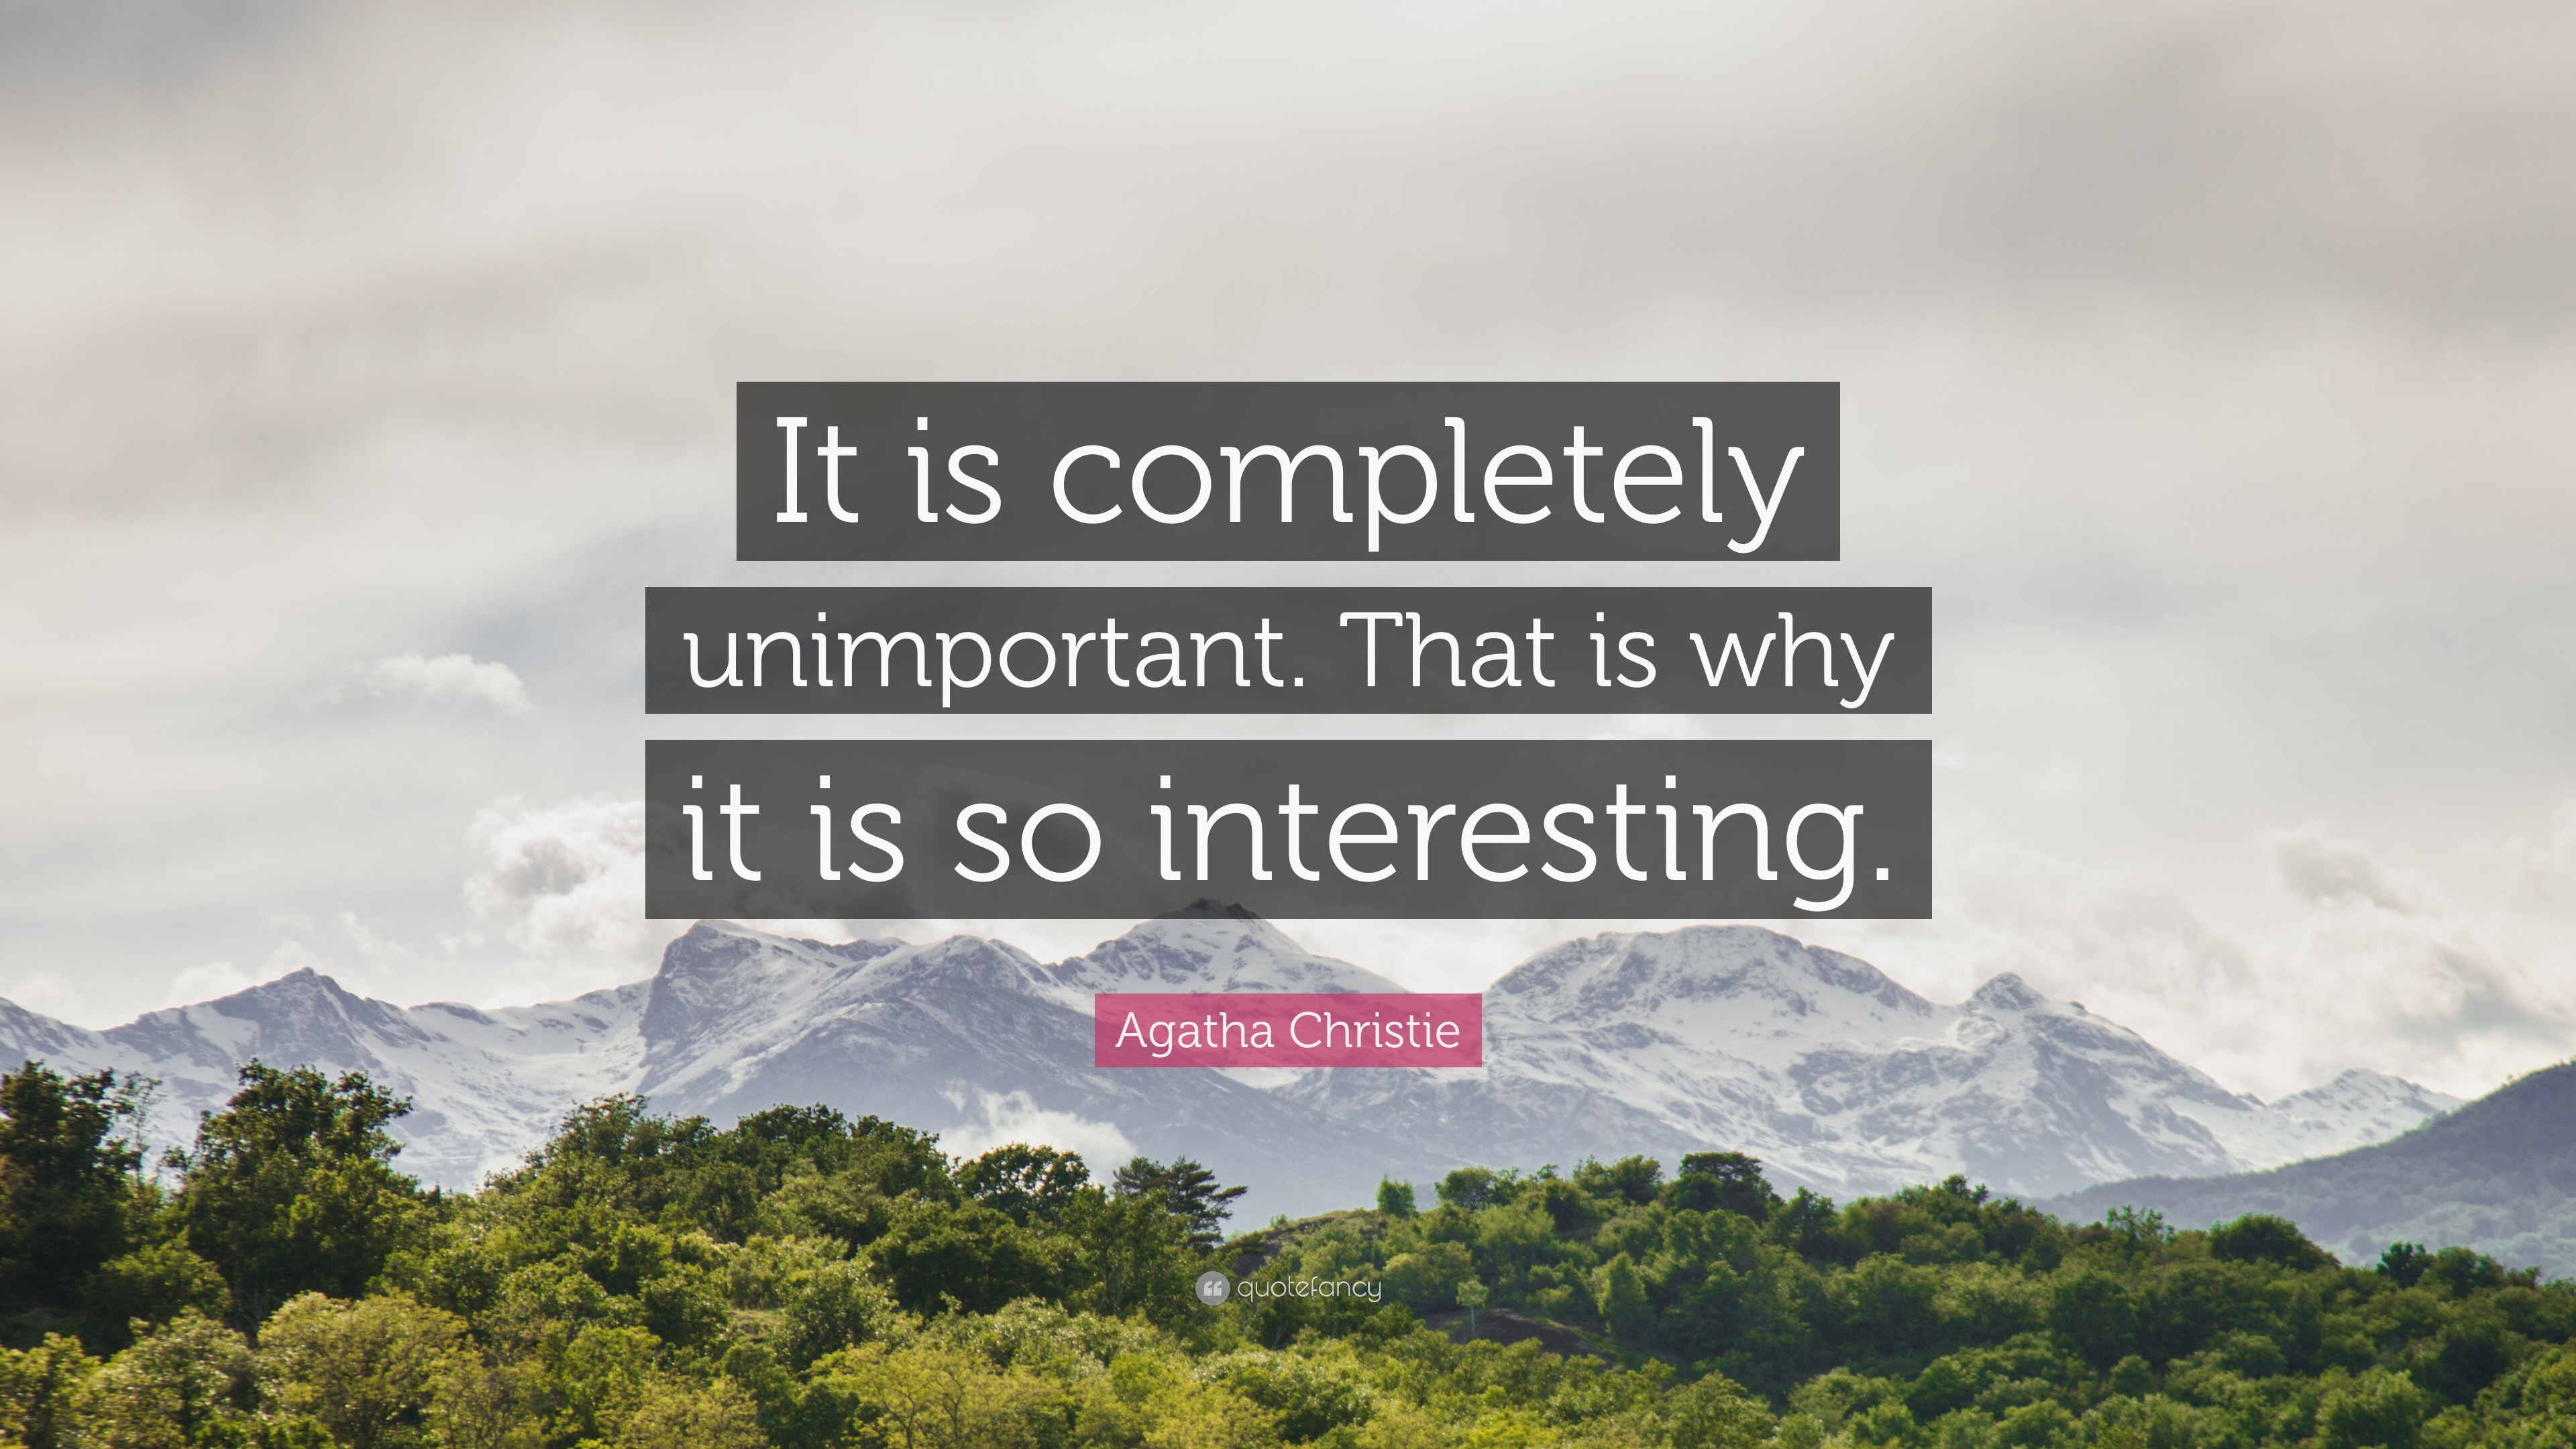 Agatha Christie Quote: “It is completely unimportant. That is why it is so  interesting.”